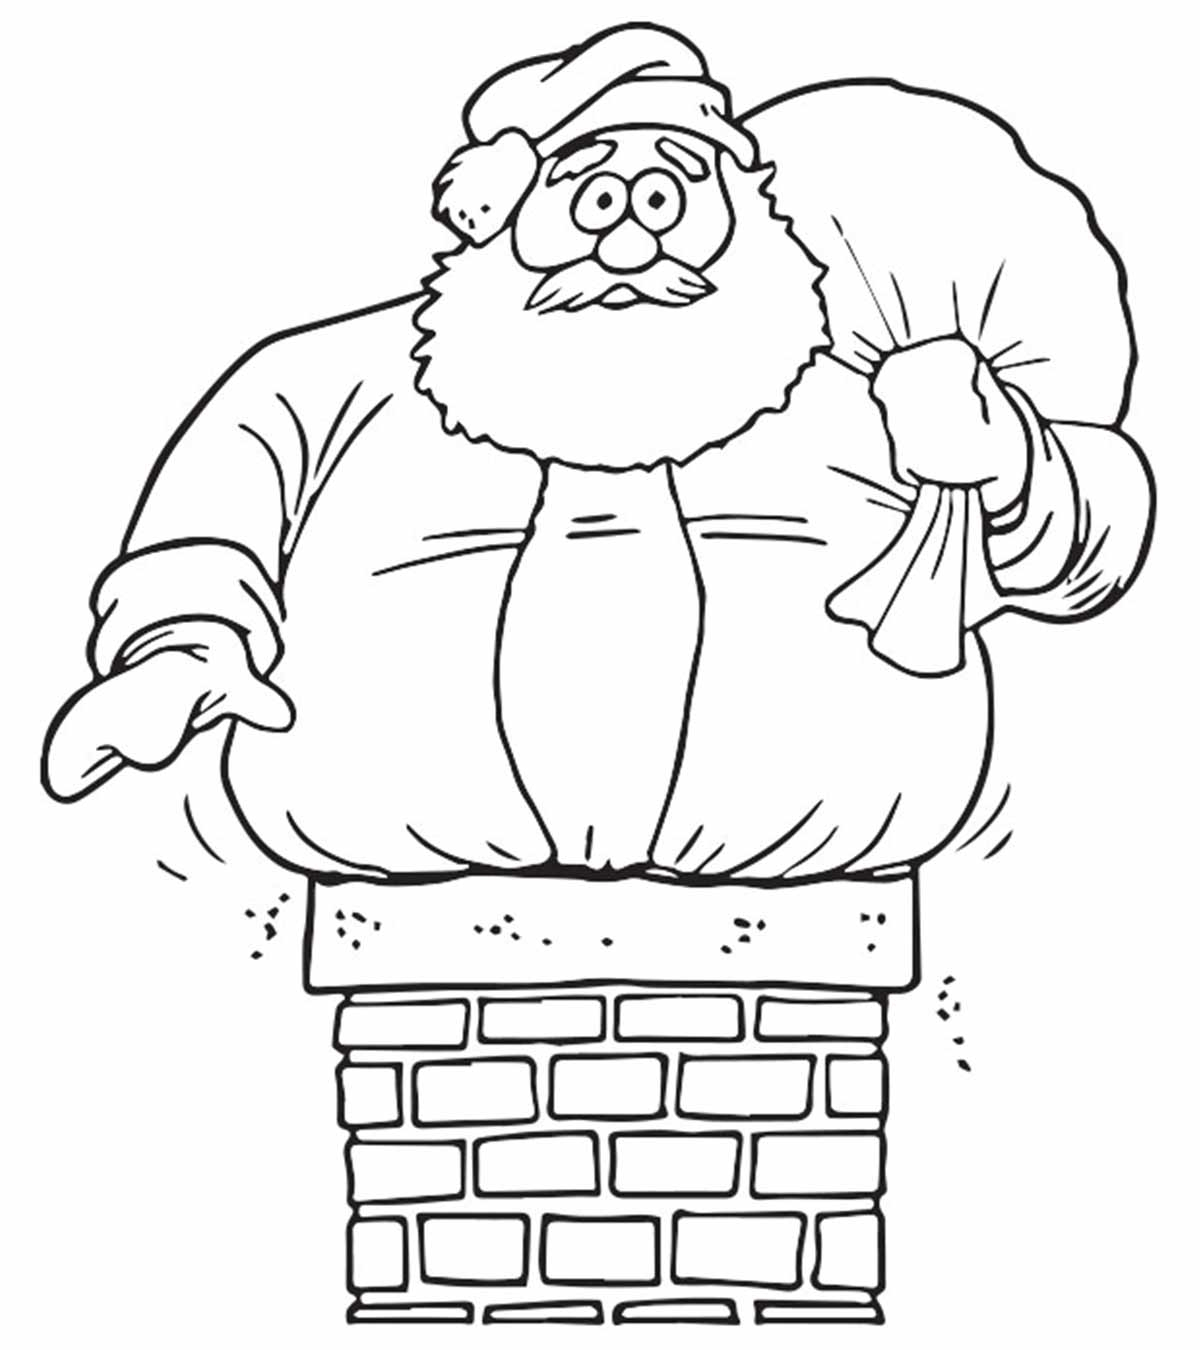 Santa Coloring Pages Free 30 Cute Santa Claus Coloring Pages For Your Little Ones